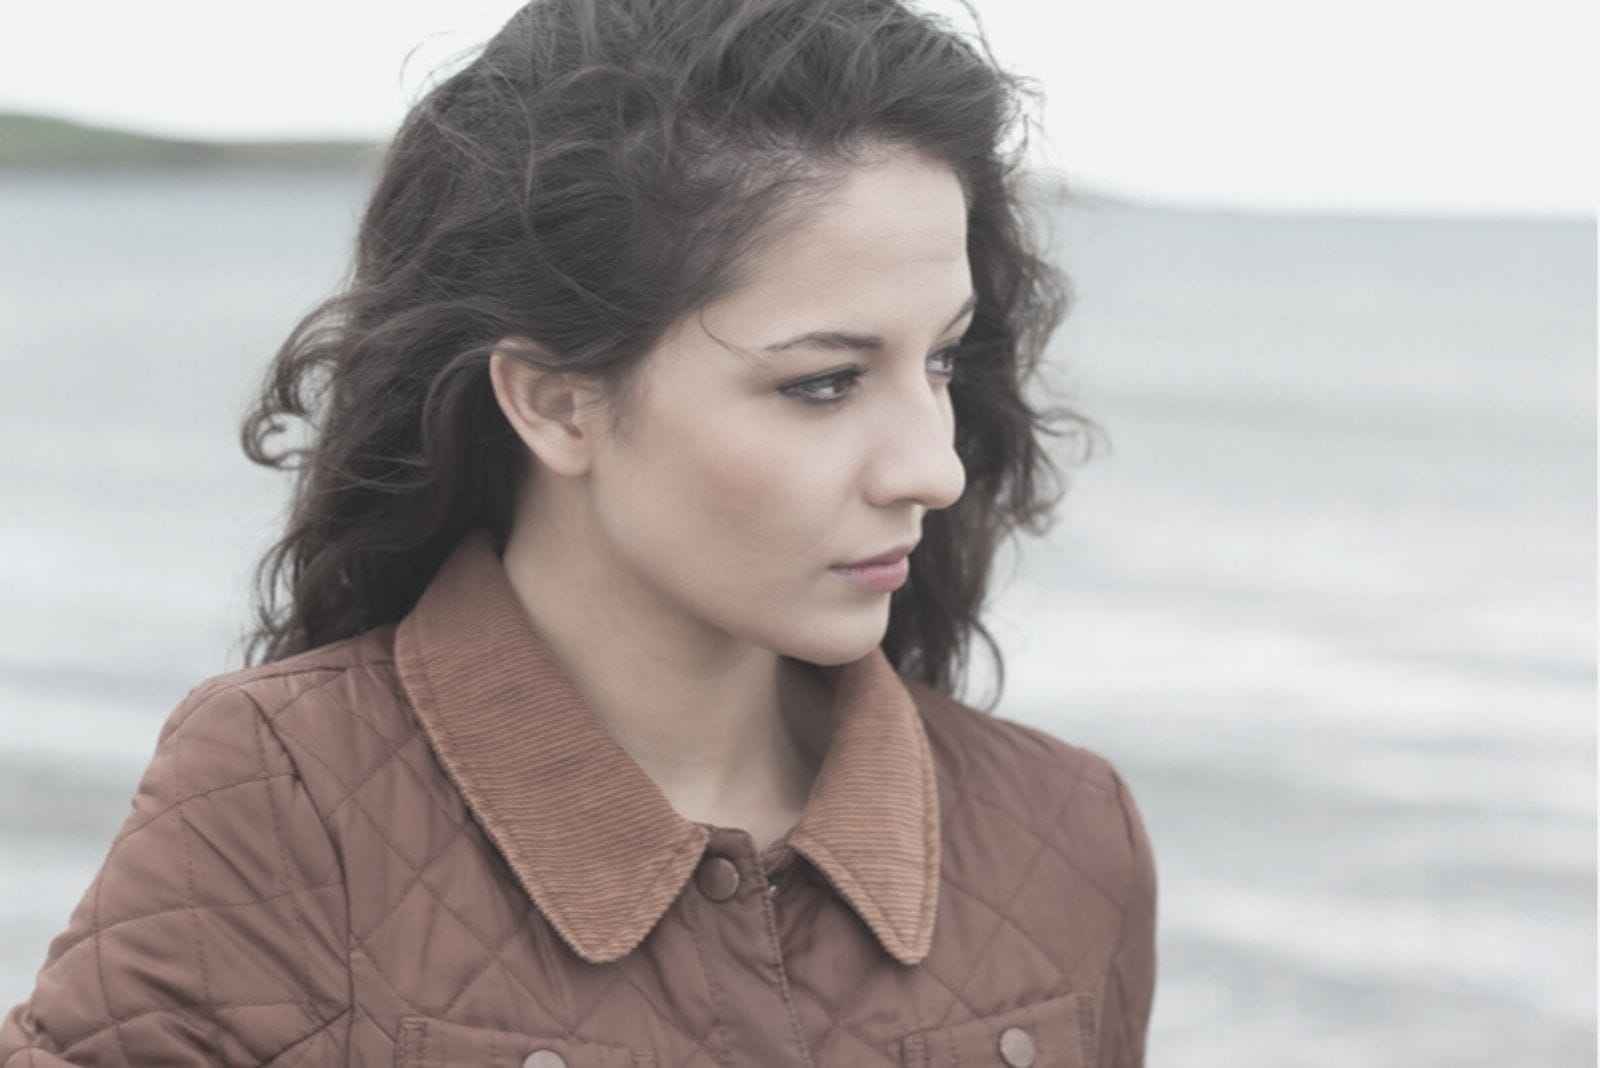 pensive woman walking by the seashore wearing brown jacket in close up photography